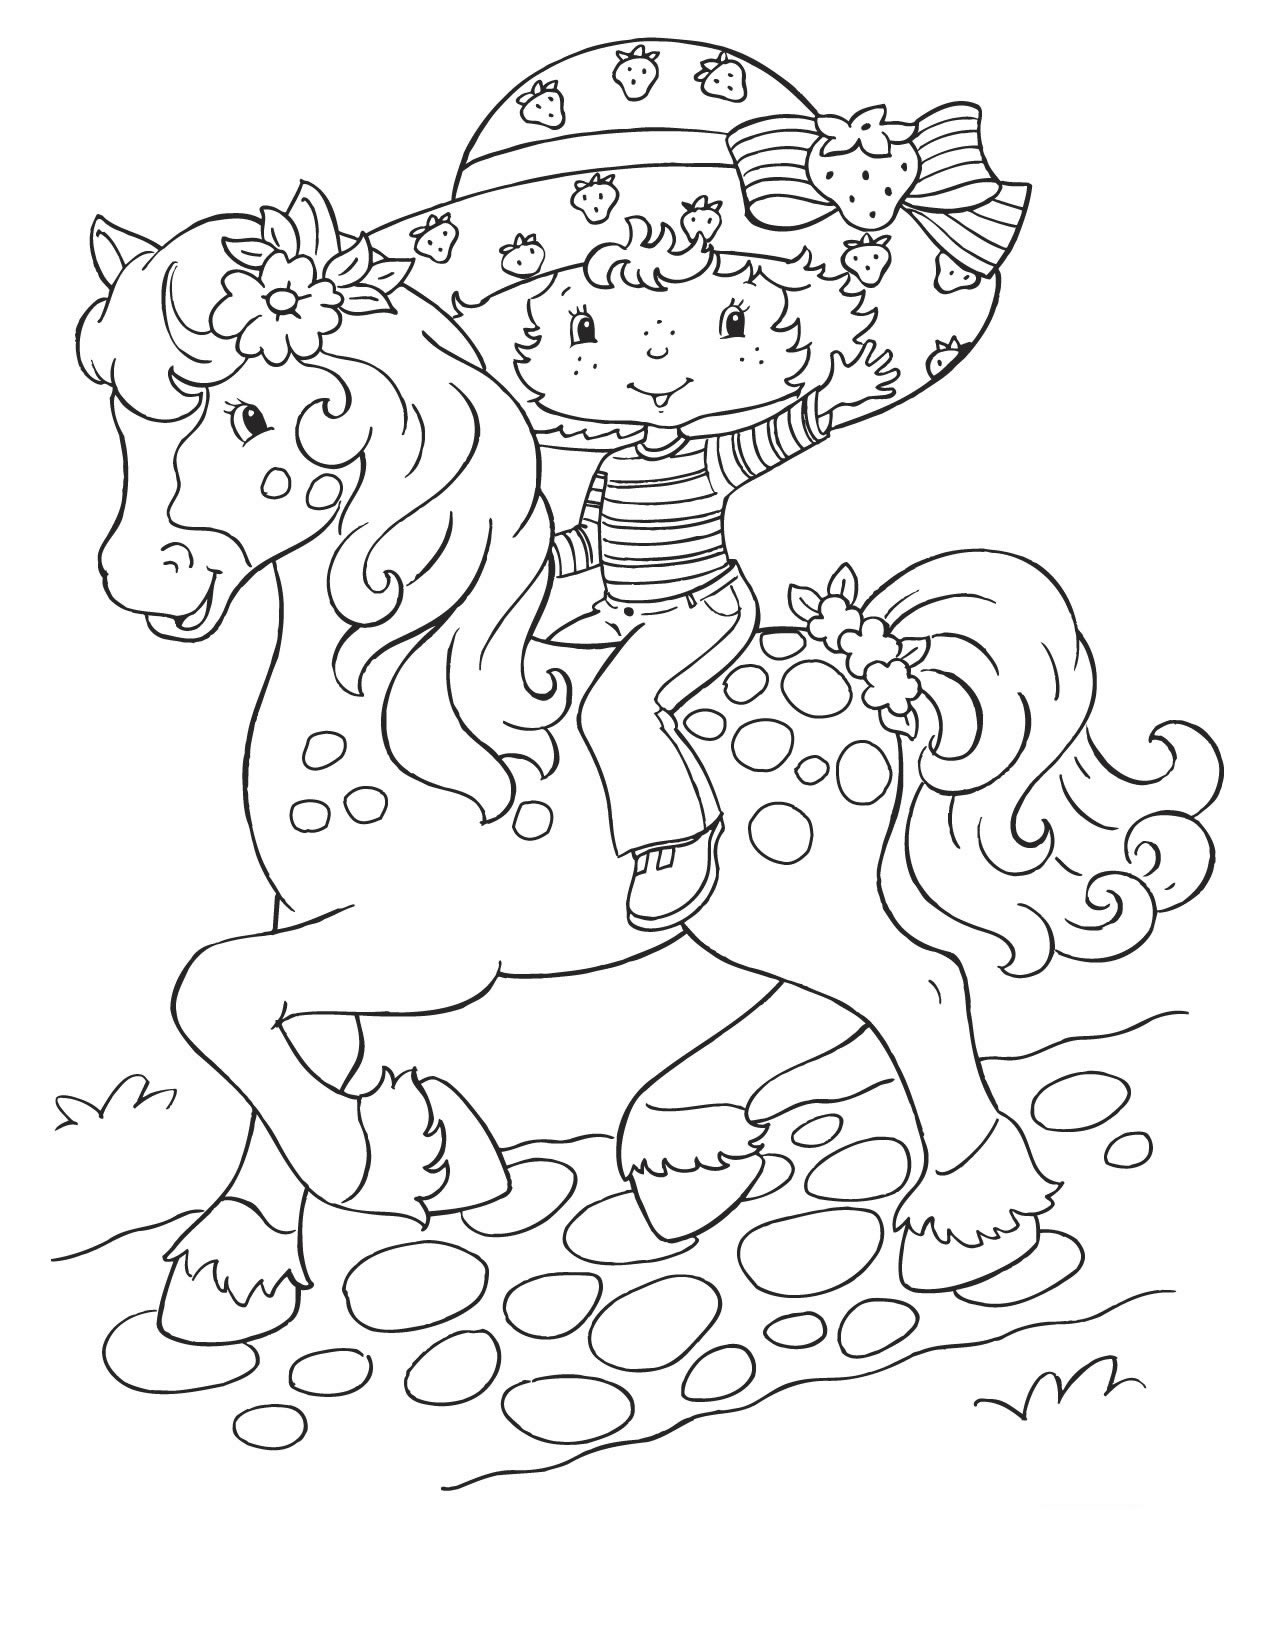  Strawberry Shortcake Coloring Pages / Cool coloring pages / 14